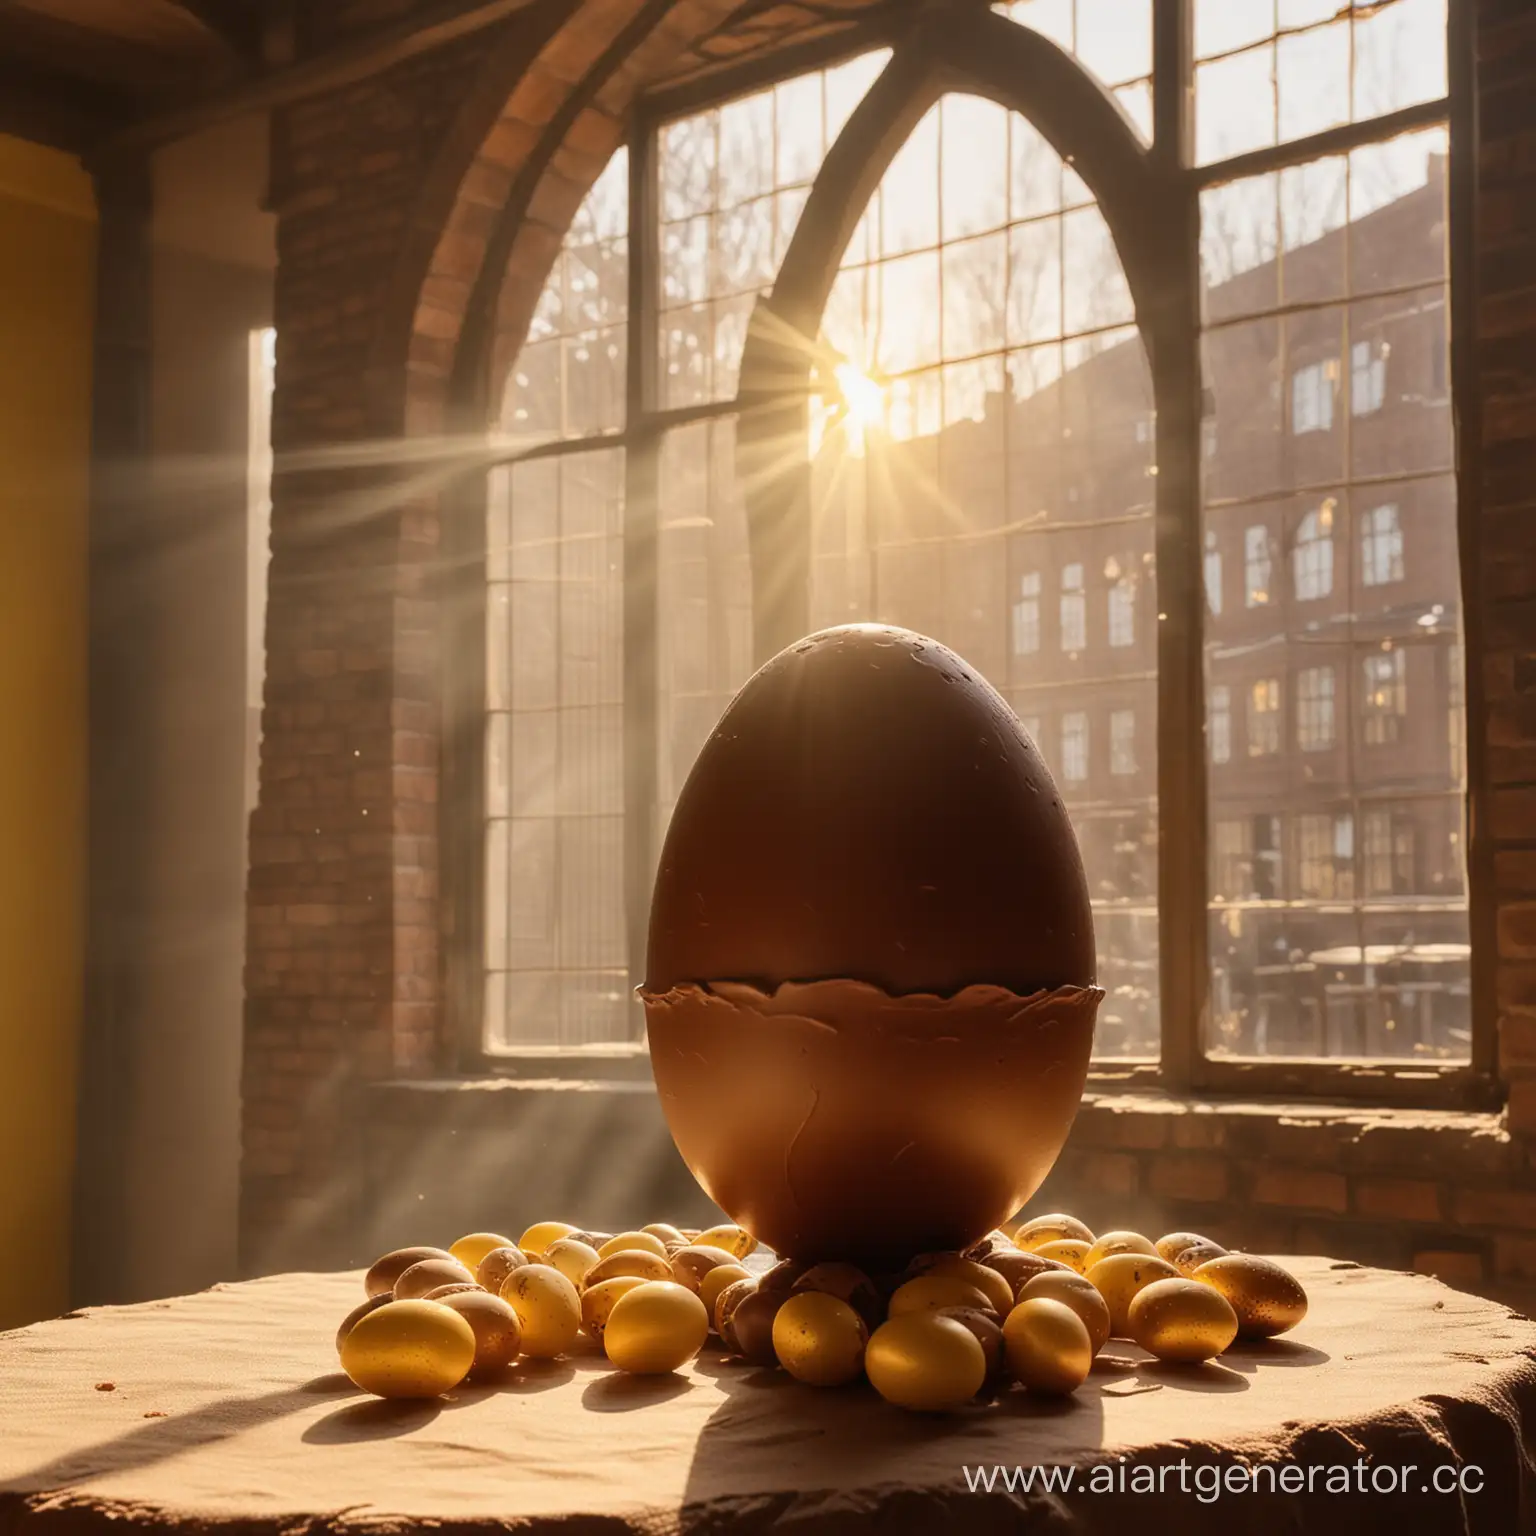 Easter-Chocolate-Egg-Display-at-Historic-Chocolate-Factory-with-Soft-Lighting